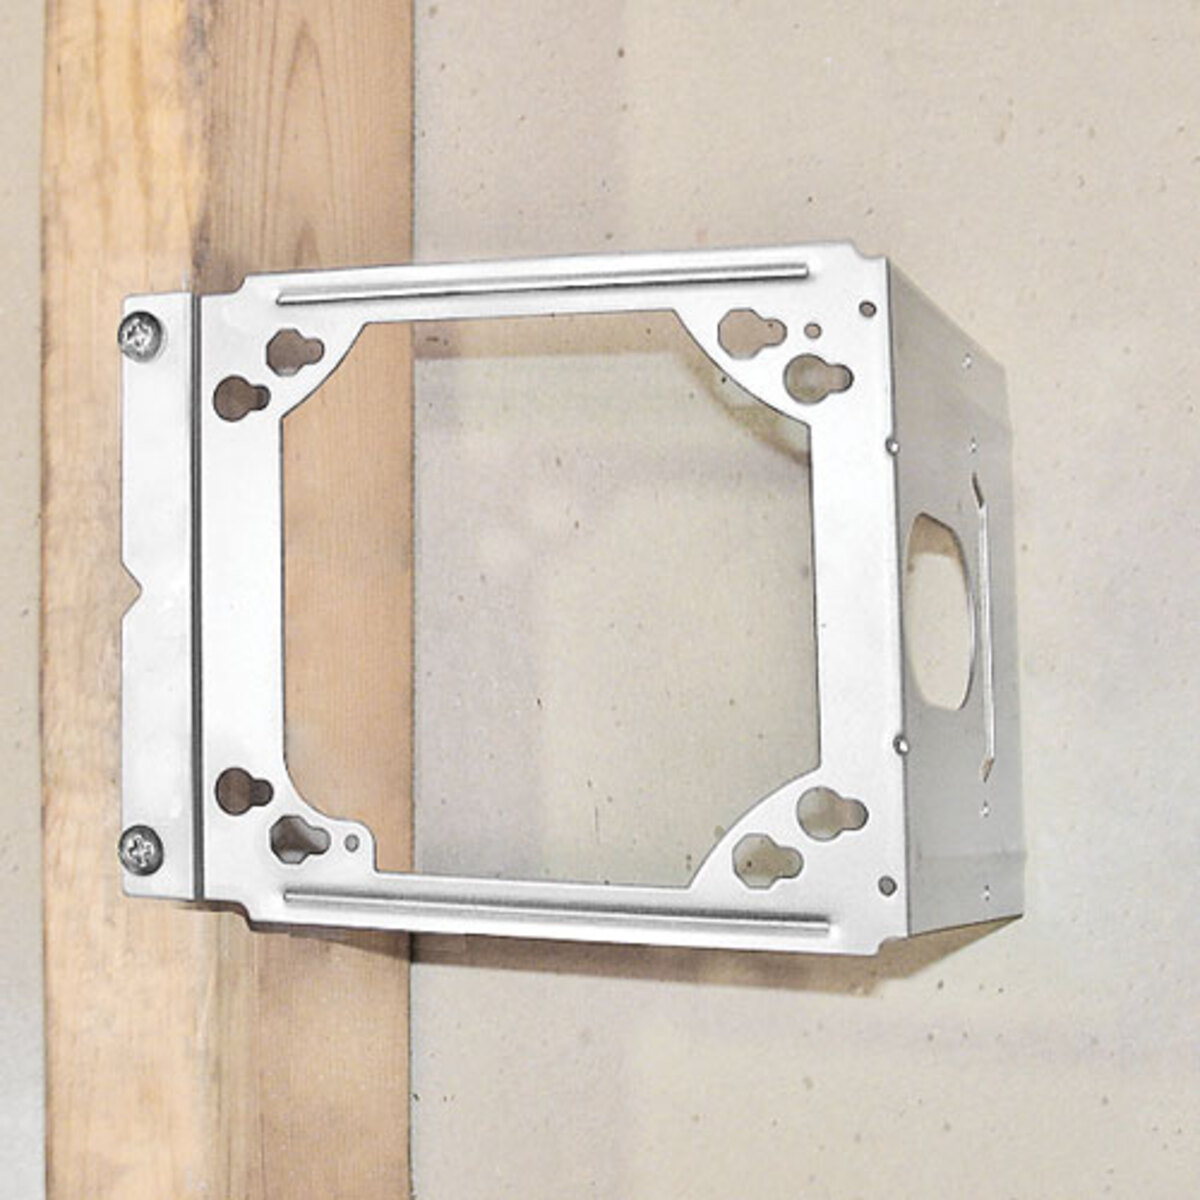 Box Mounting Bracket For Standard Device Rings - 2-1/2" Or 3-5/8" Farside Standoff